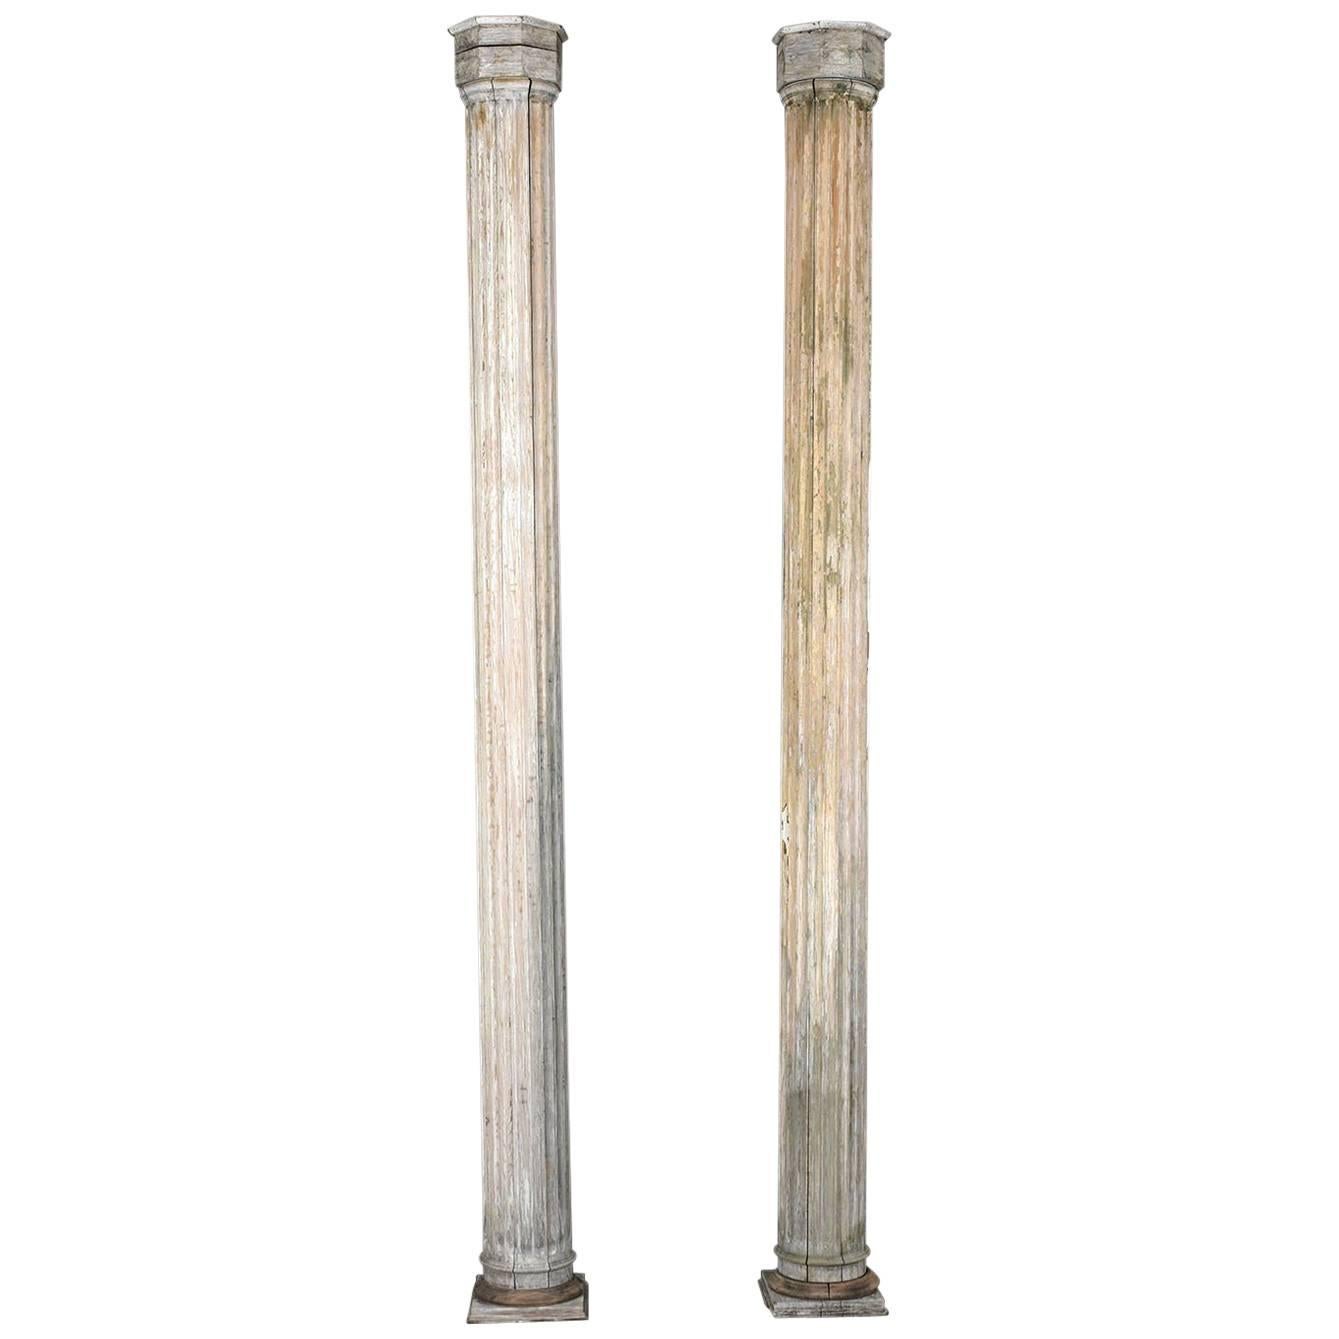 Pair of Antique Neoclassical-Style Columns